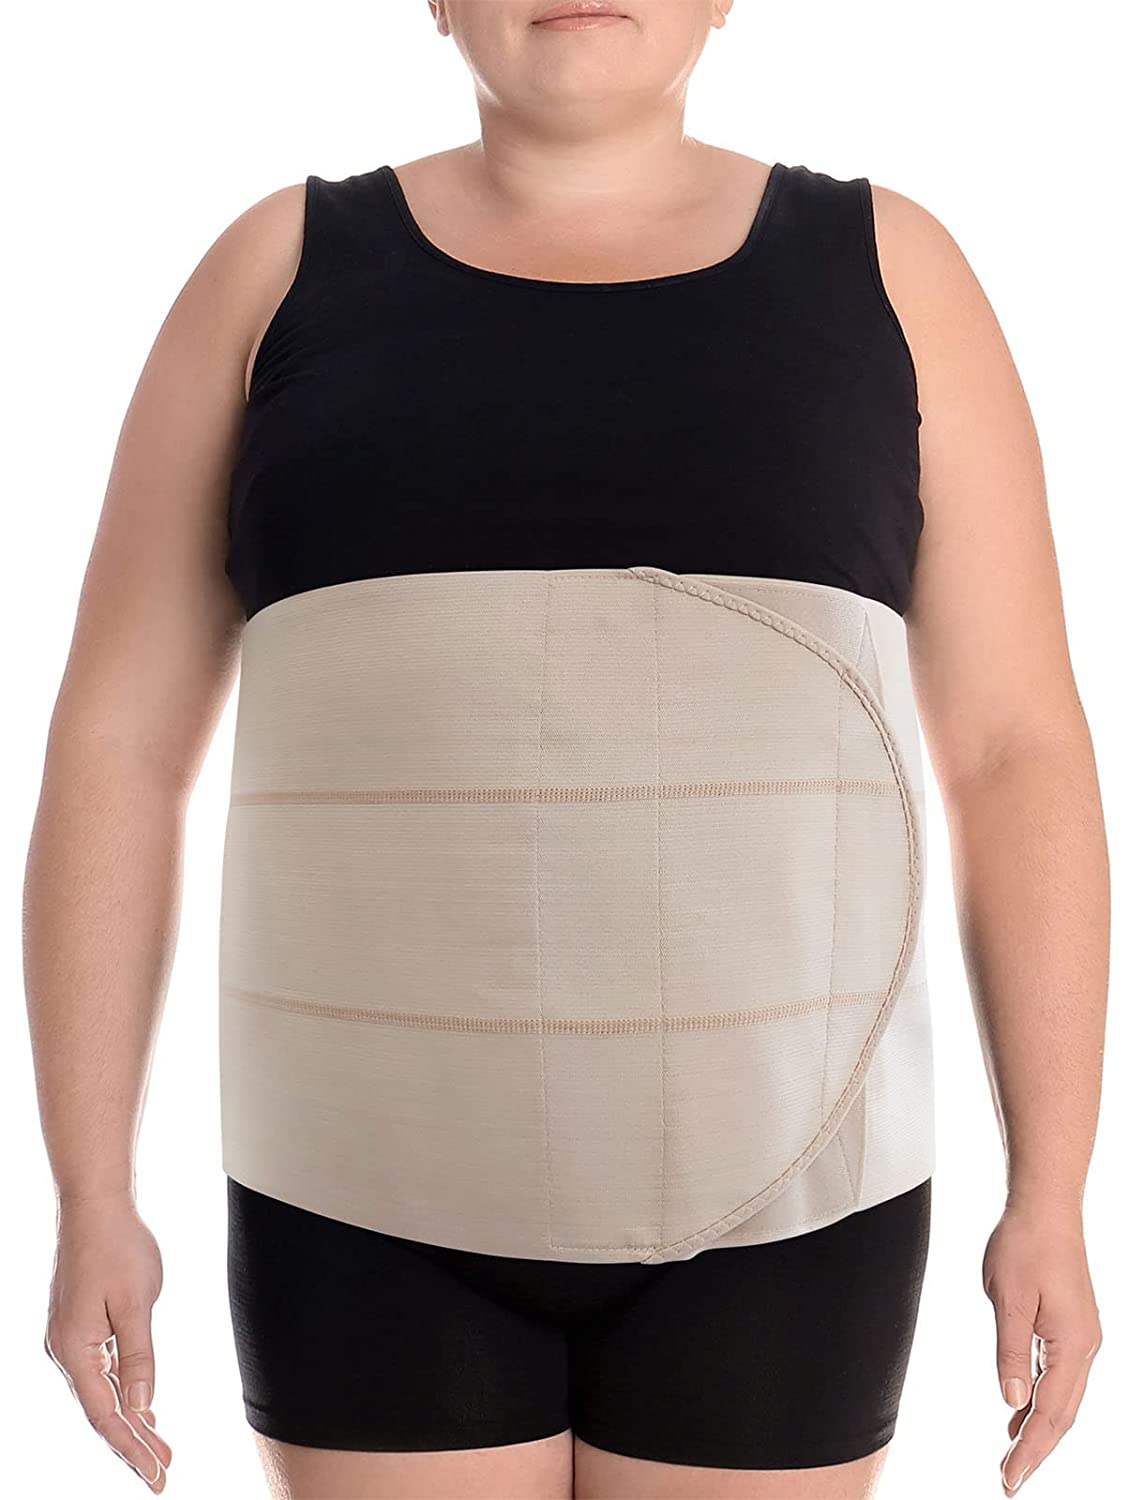 Armstrong Amerika Wide Abdominal Binder Belly Wrap – Plus Size Postpartum  Tummy Tuck Belt Provides Slimming Bariatric Stomach Compression